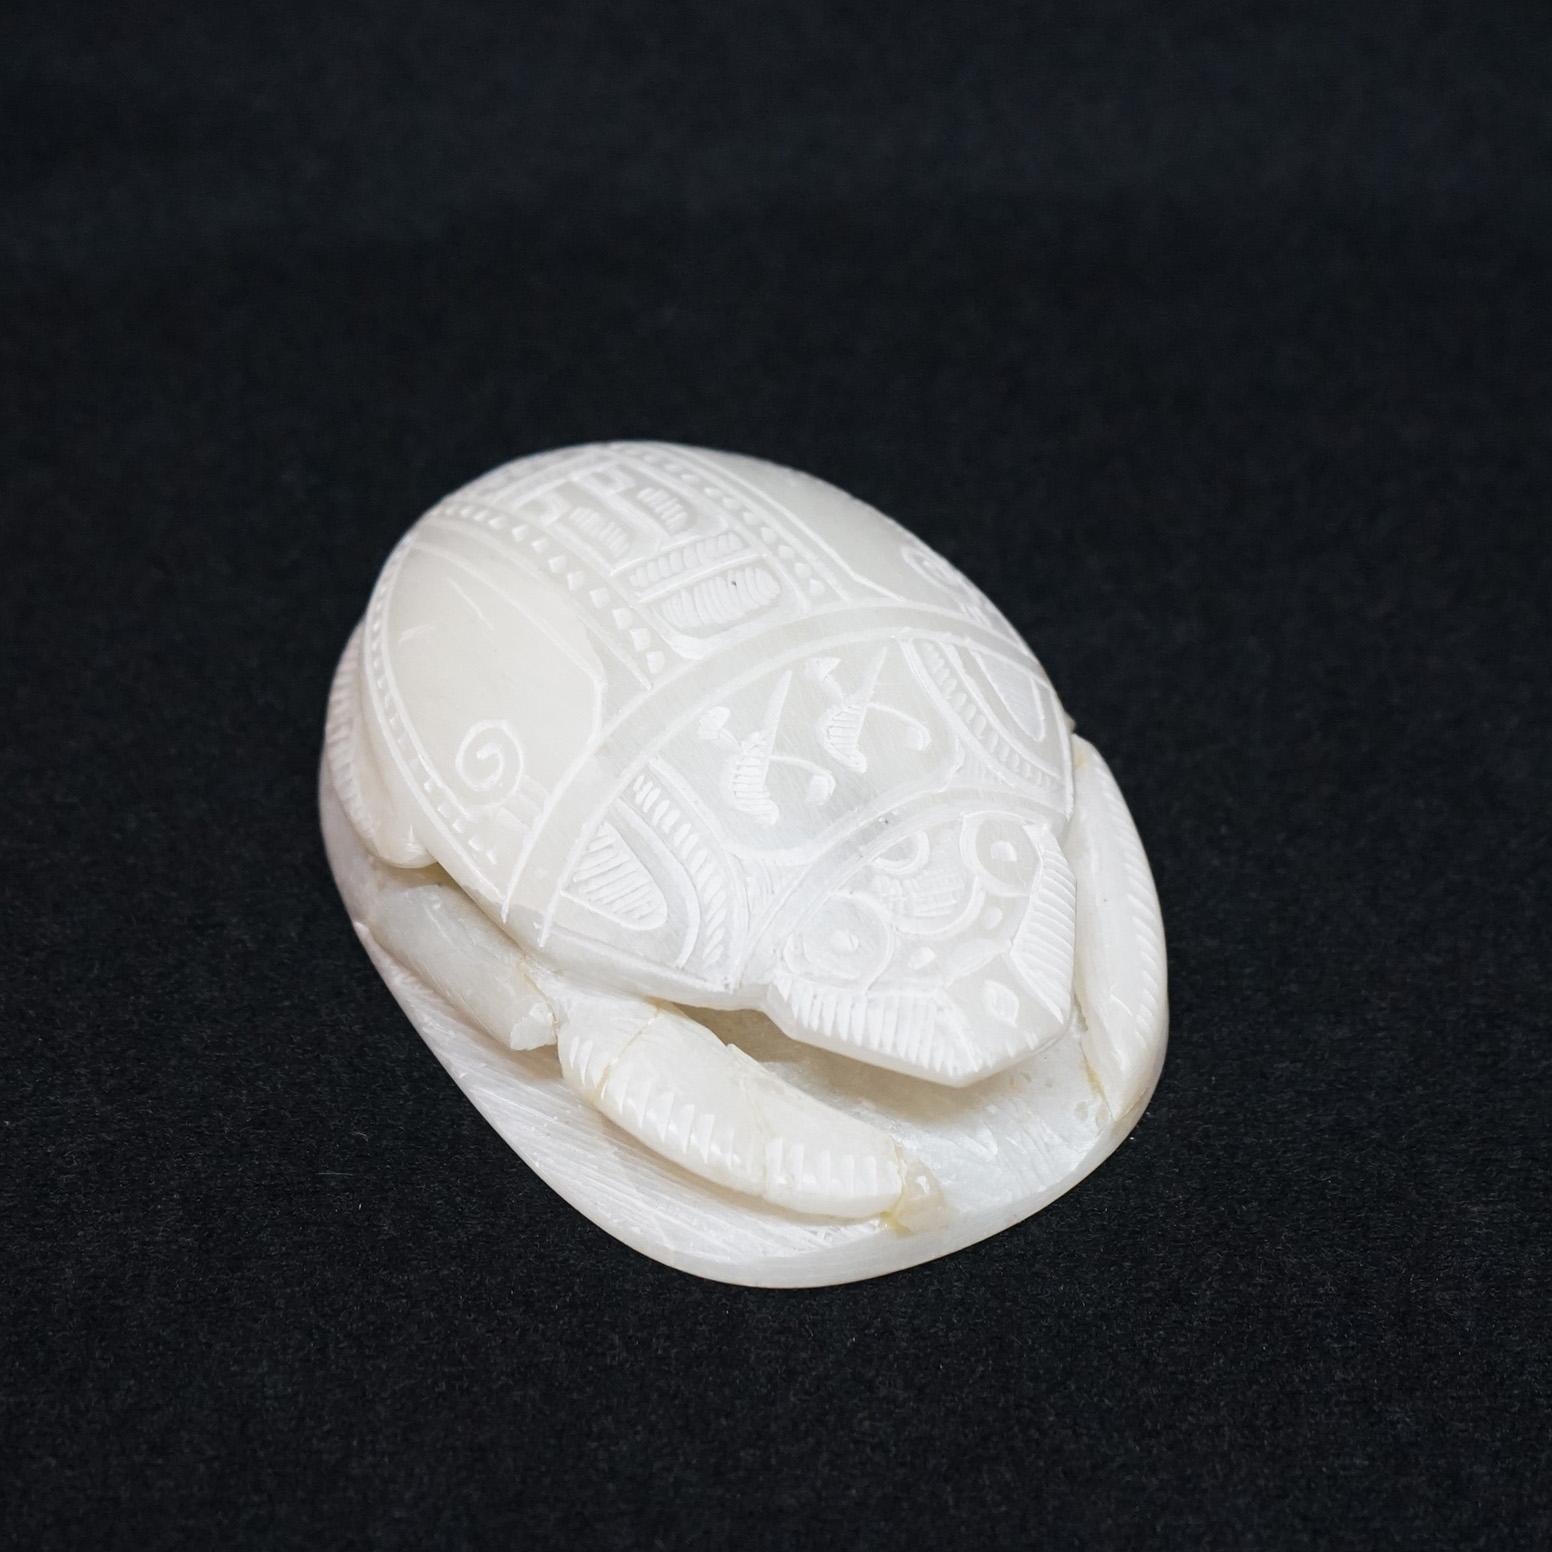 20th Century Vintage Egyptian Revival Carved Alabaster Scarab Figure Paperweight 20th C